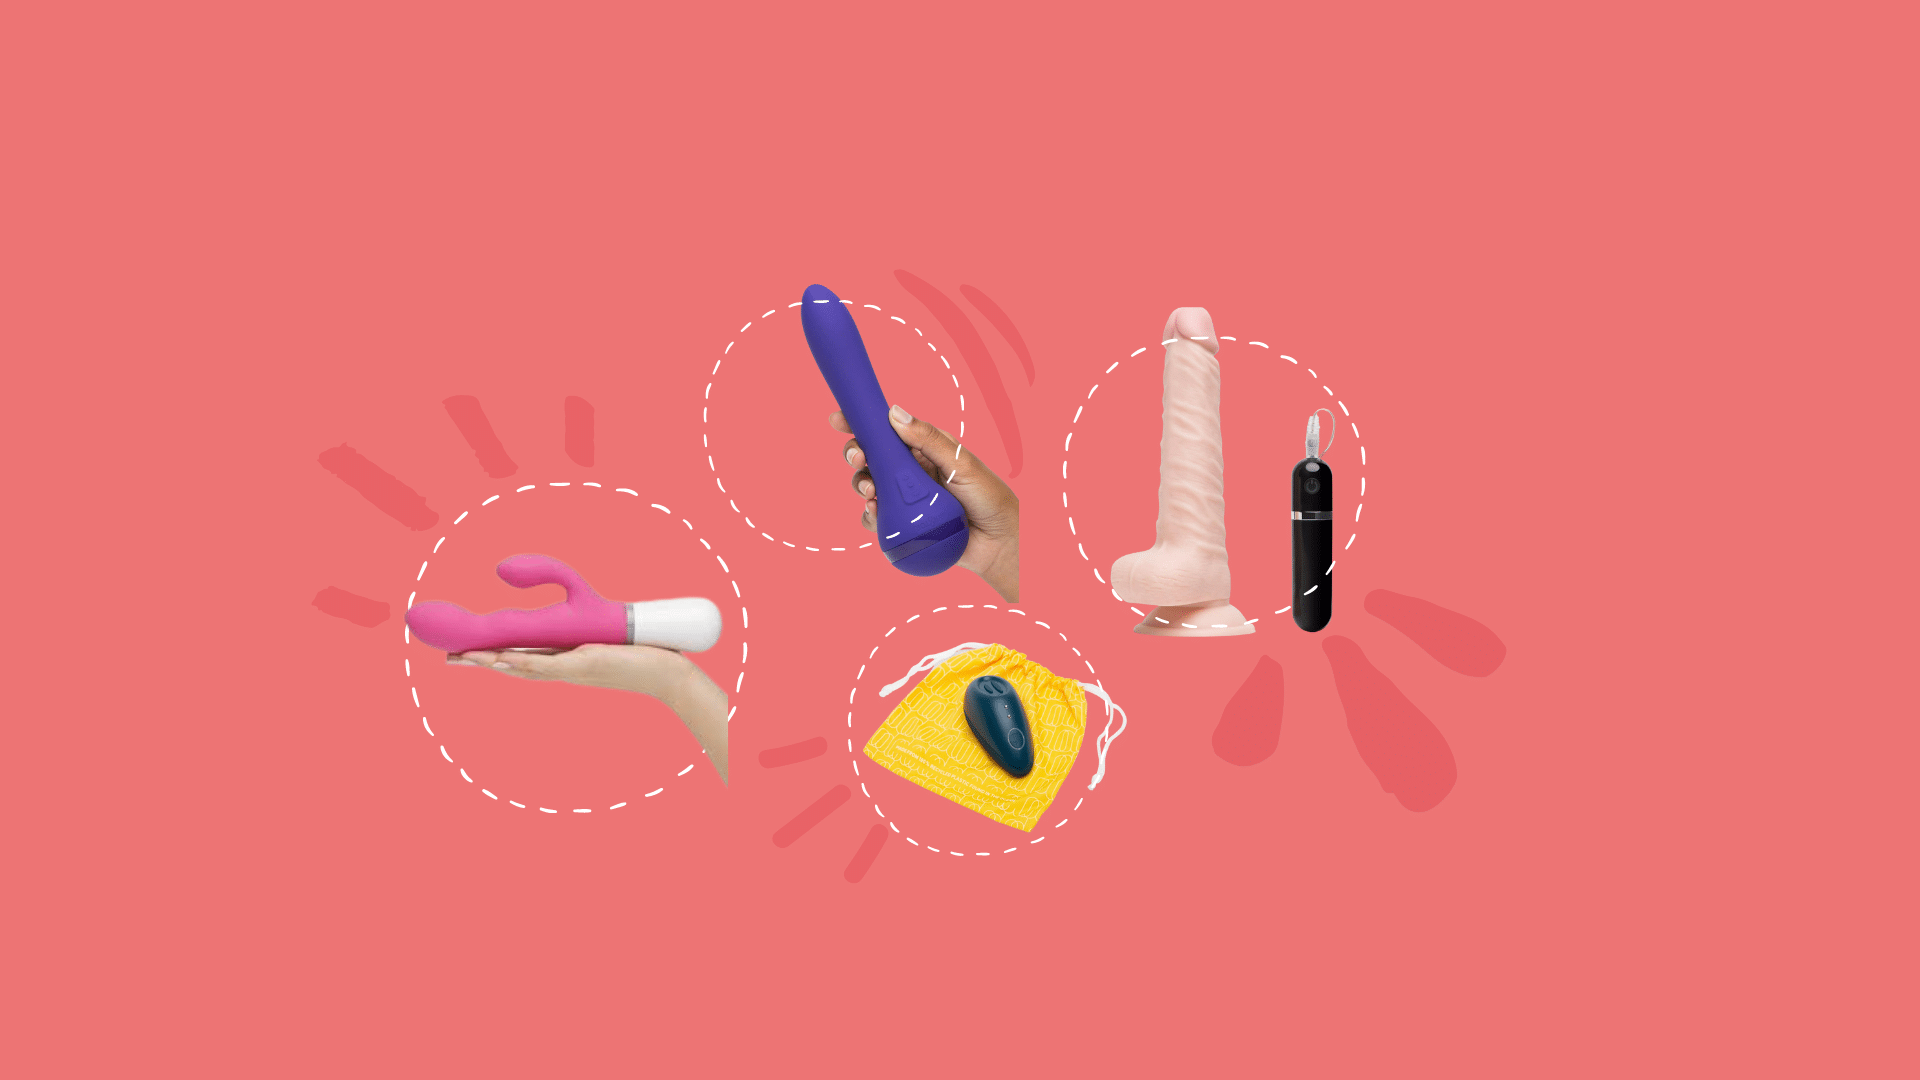 The 8 Best Rotating Dildos For Wiggling, Gyrating and Spinning Fun